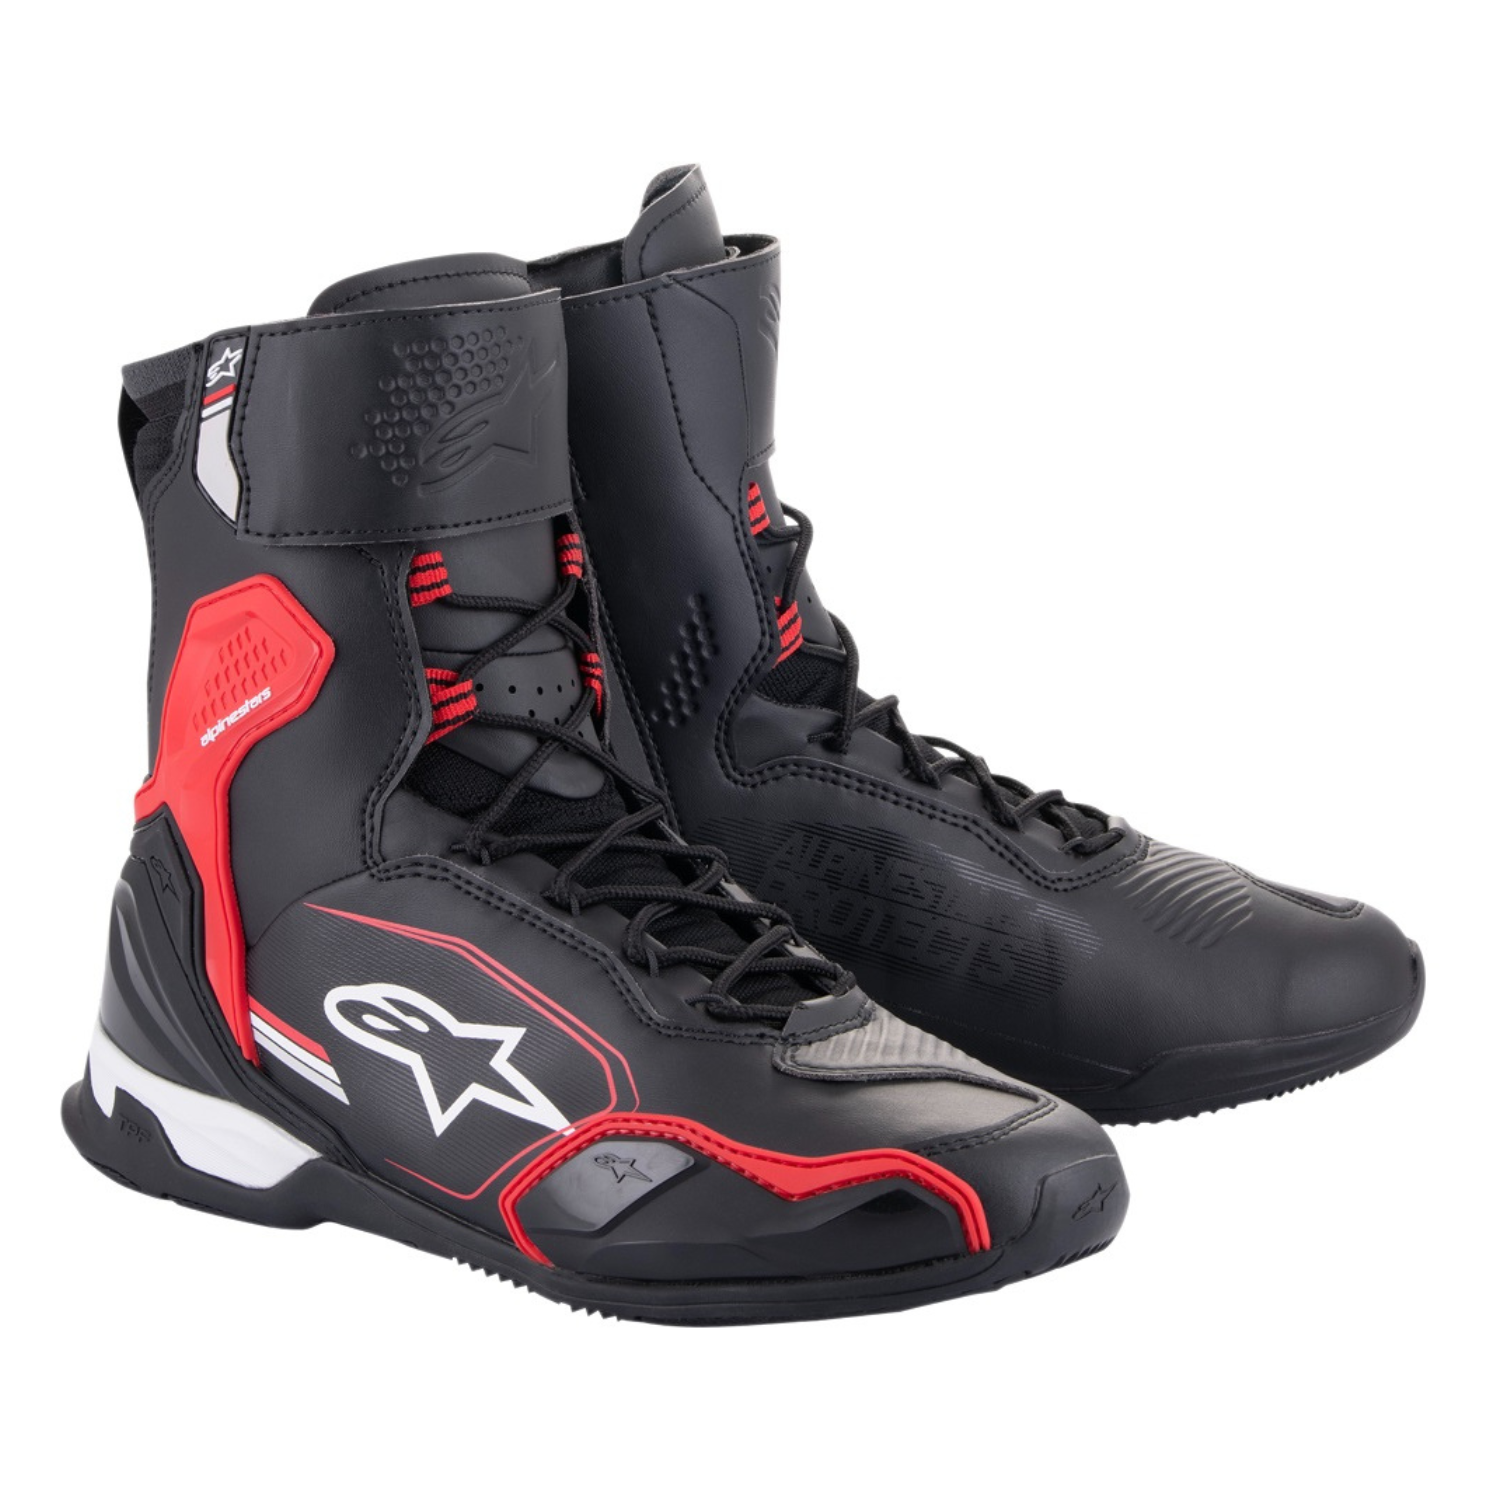 Image of Alpinestars Superfaster Shoes Black Bright Red White Taille US 75